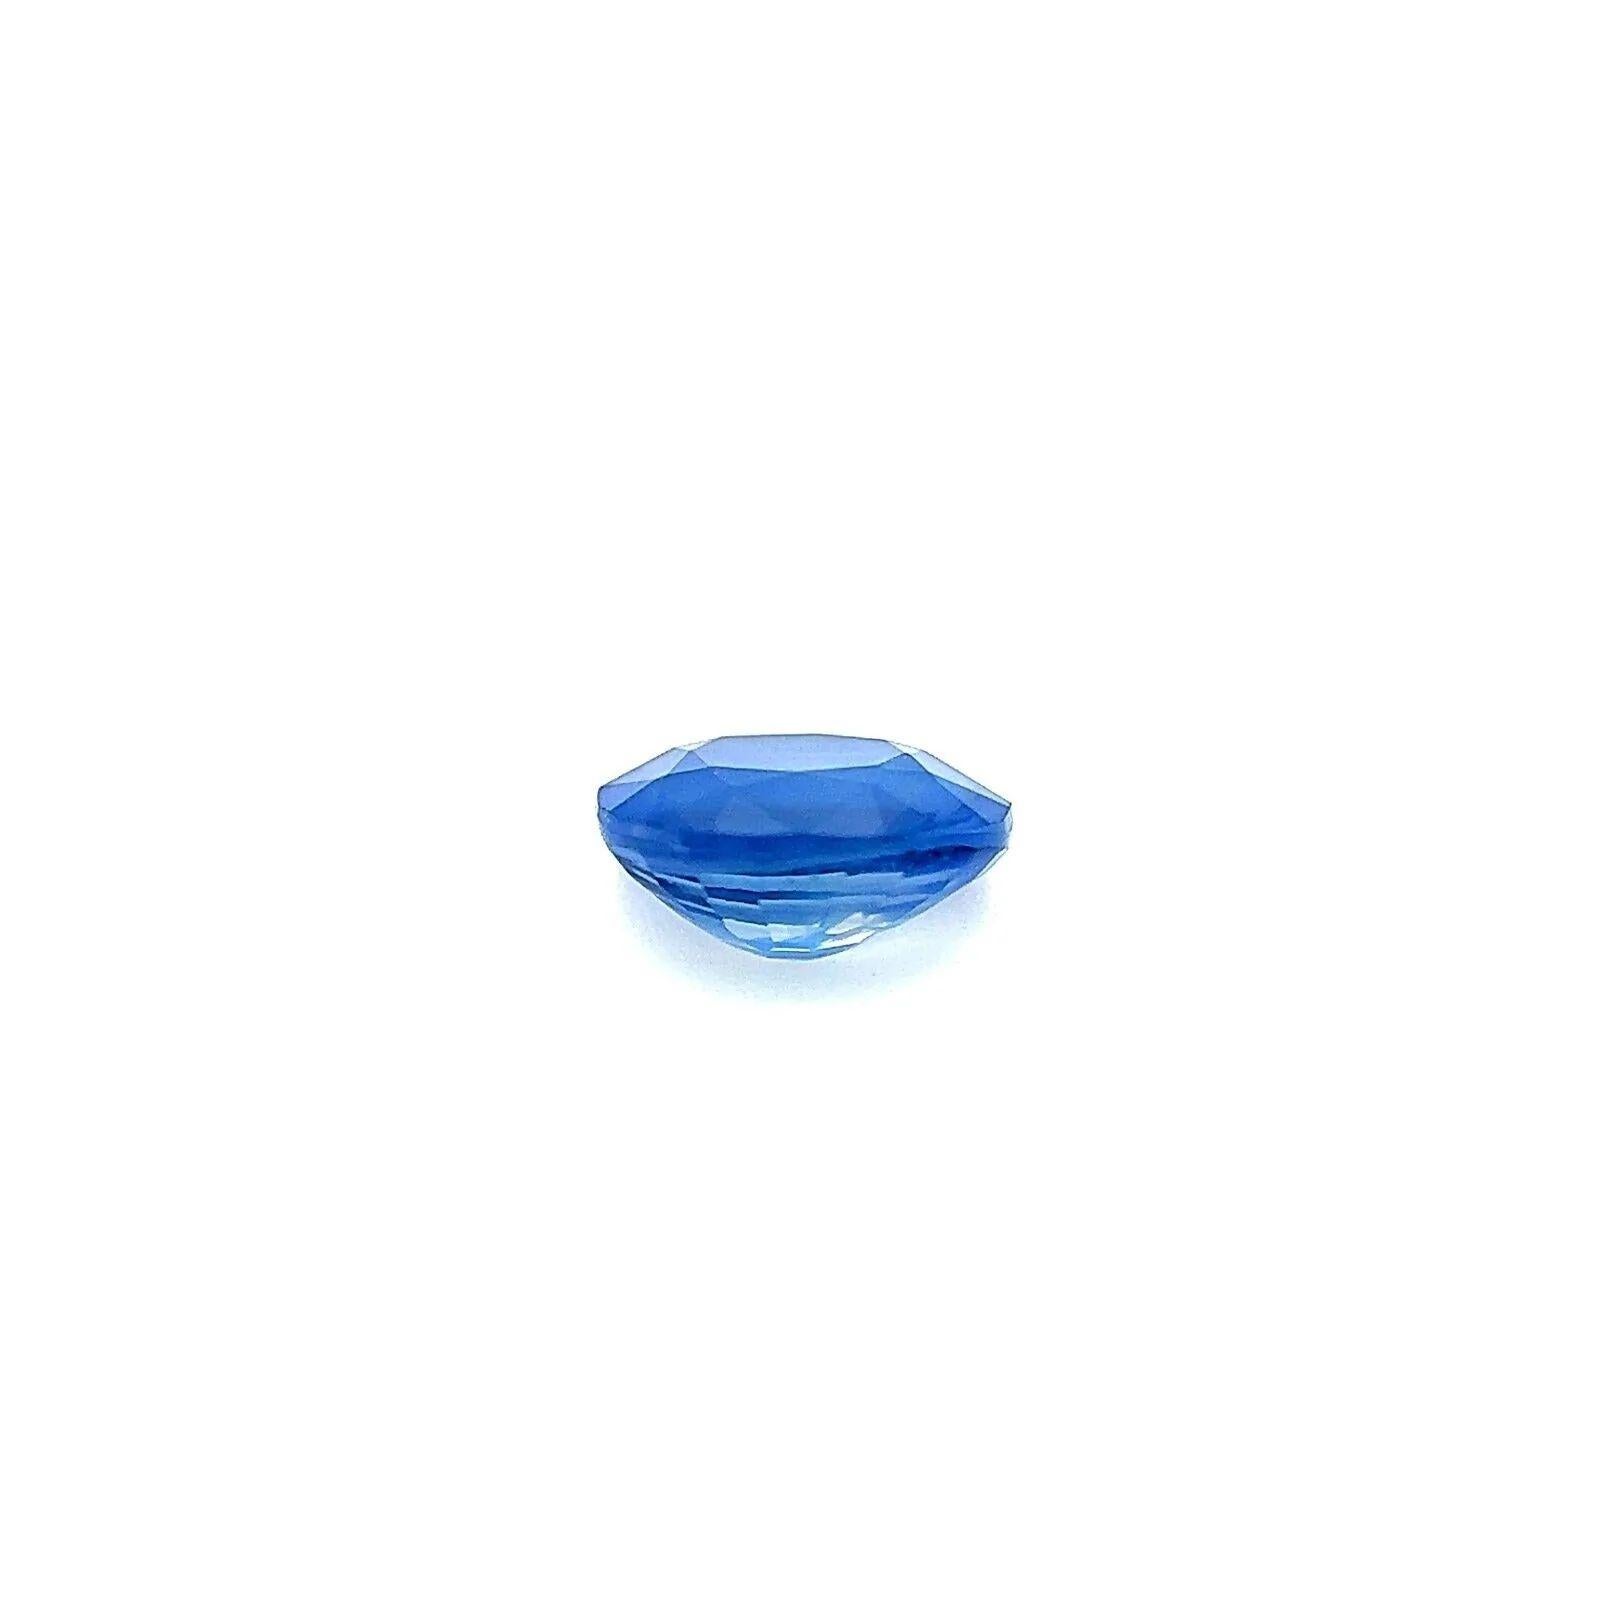 are sapphires valuable